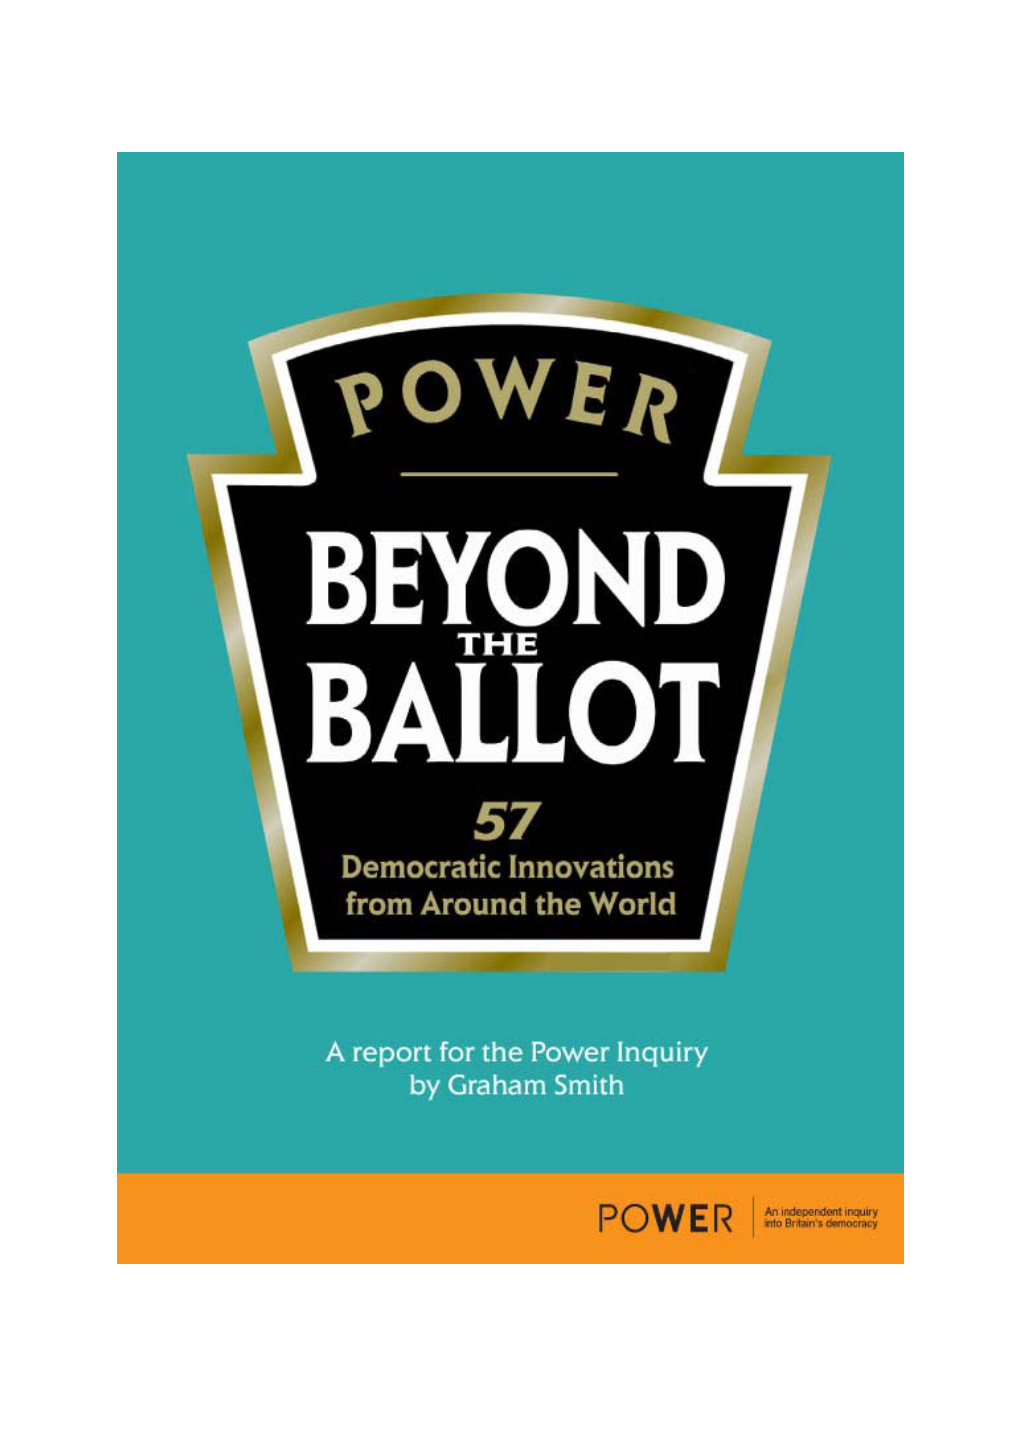 Beyond the Ballot 57 Democratic Innovations From